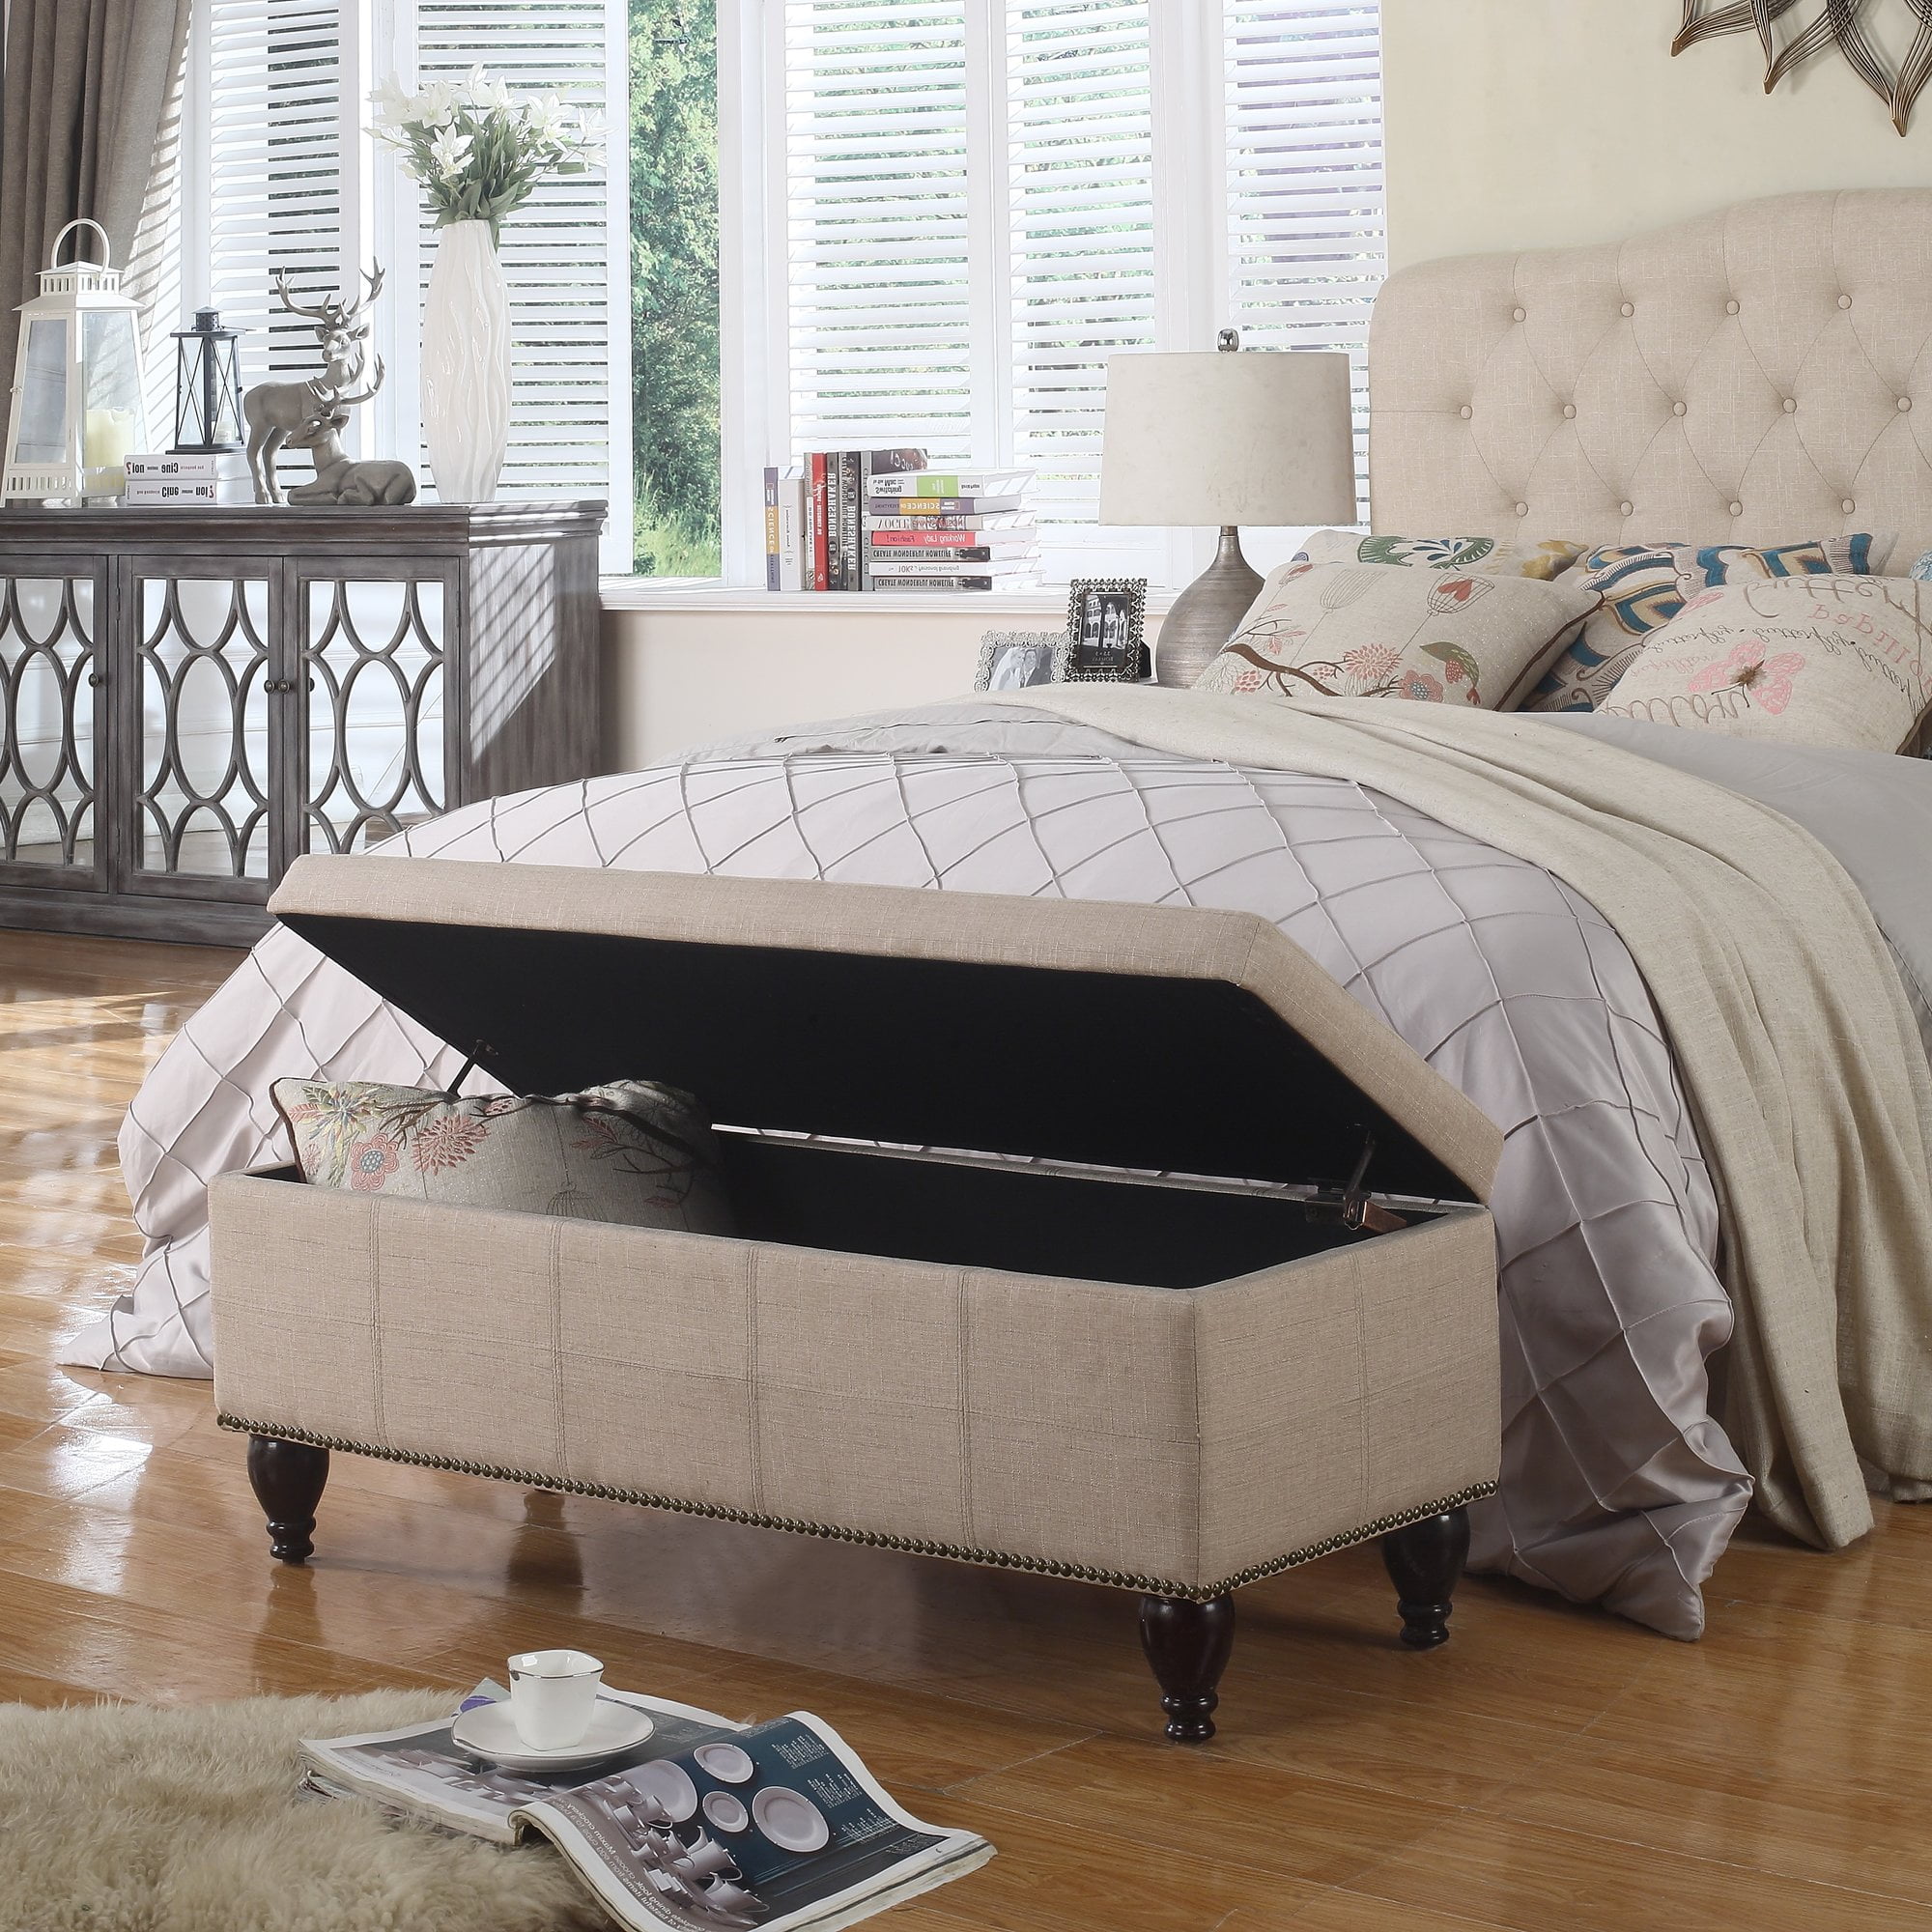 Transform Your Bedroom With A Versatile Storage Bench